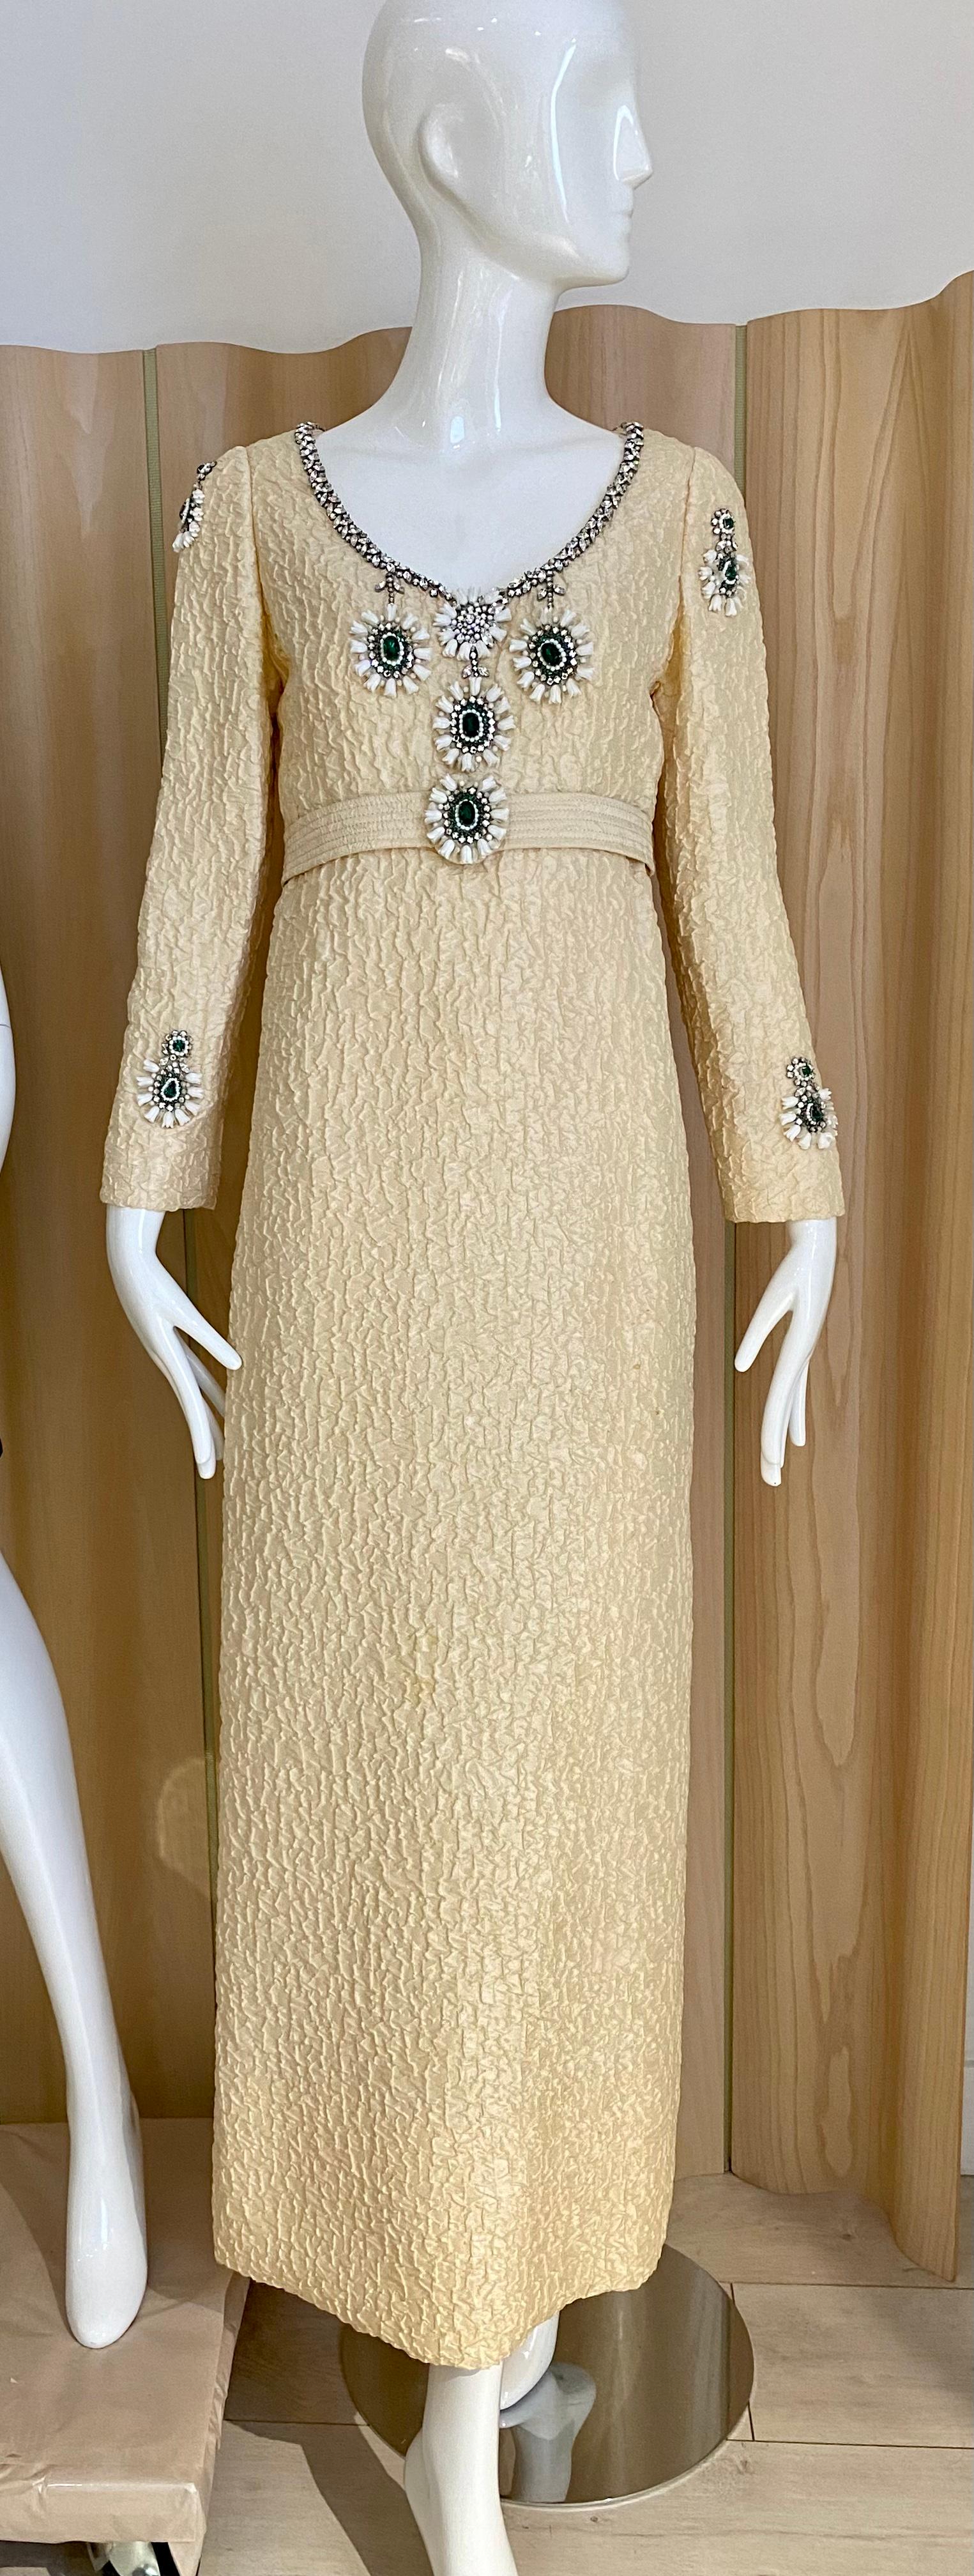 1960s Galanos Creme Long Sleeve Dress with Green Rhinestones Embellishment  For Sale 4